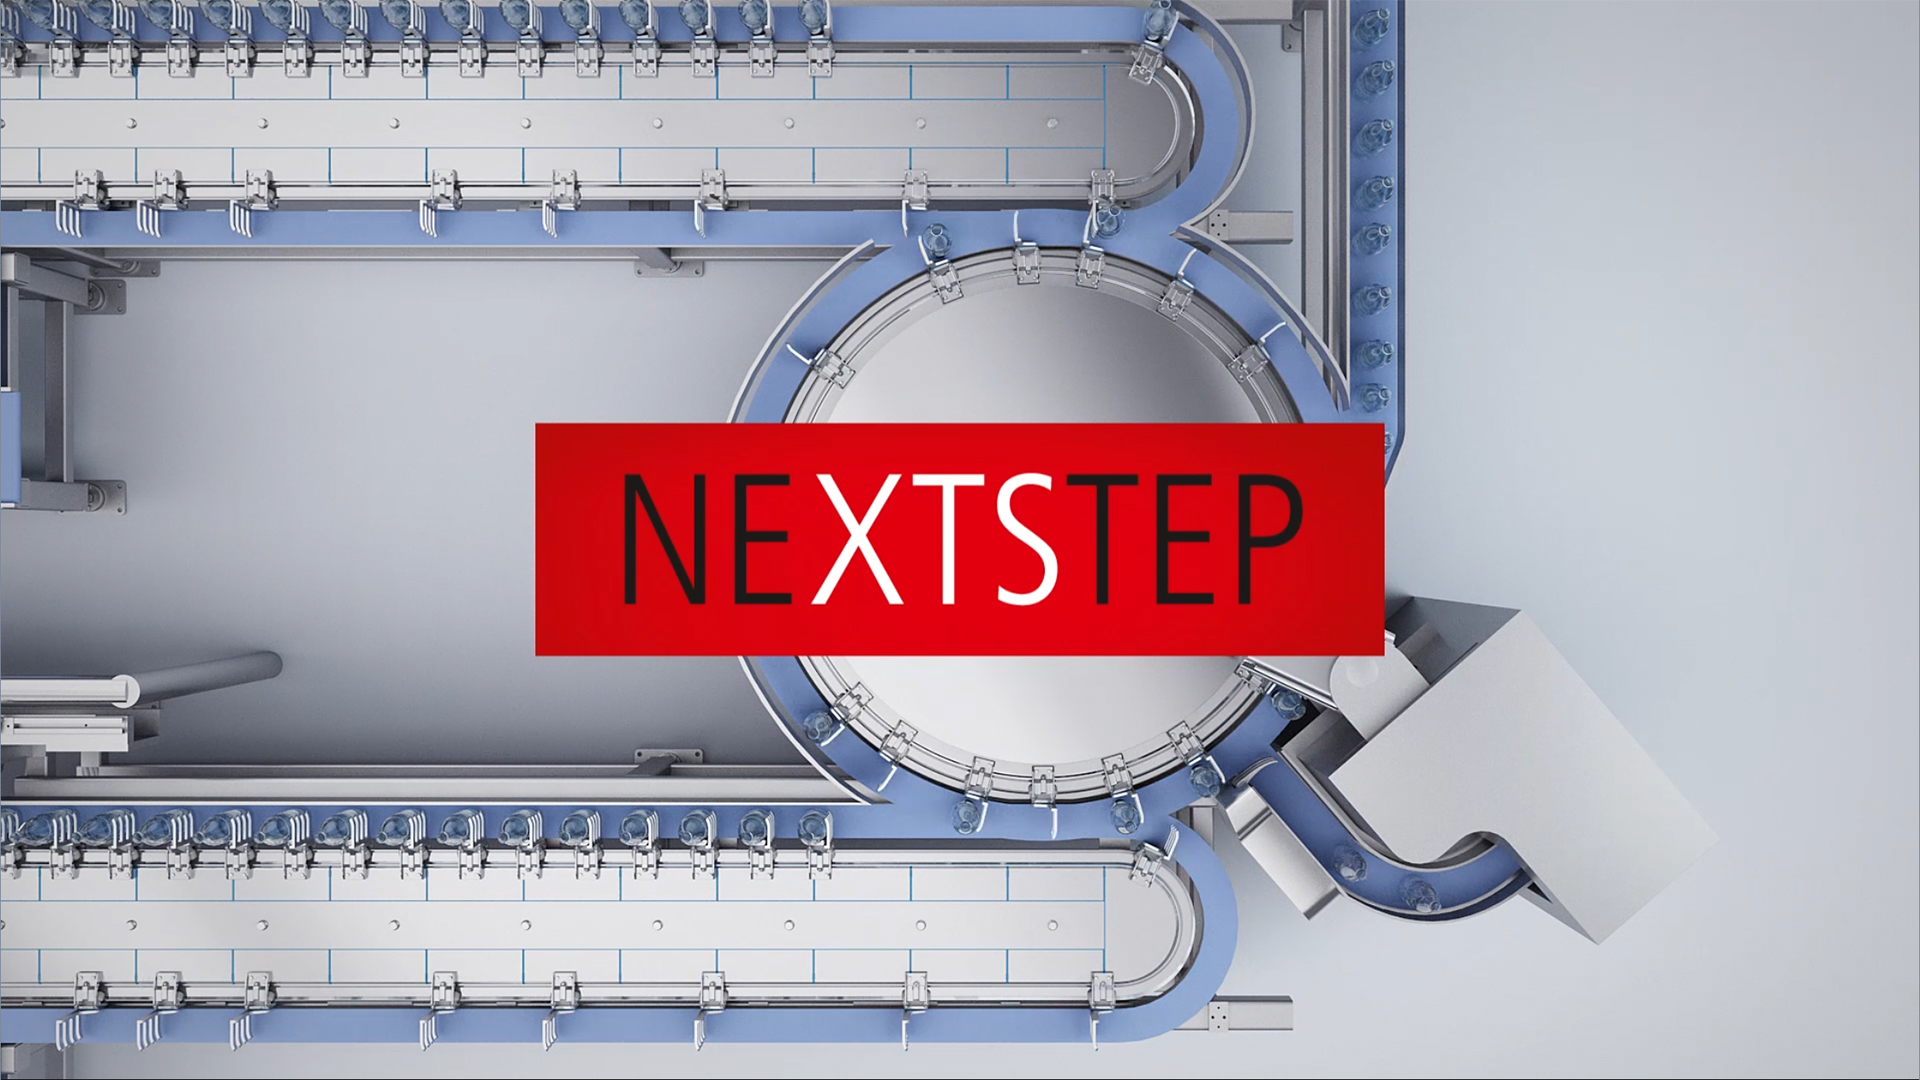 The XTS enables new machine designs for beverage filling lines. 